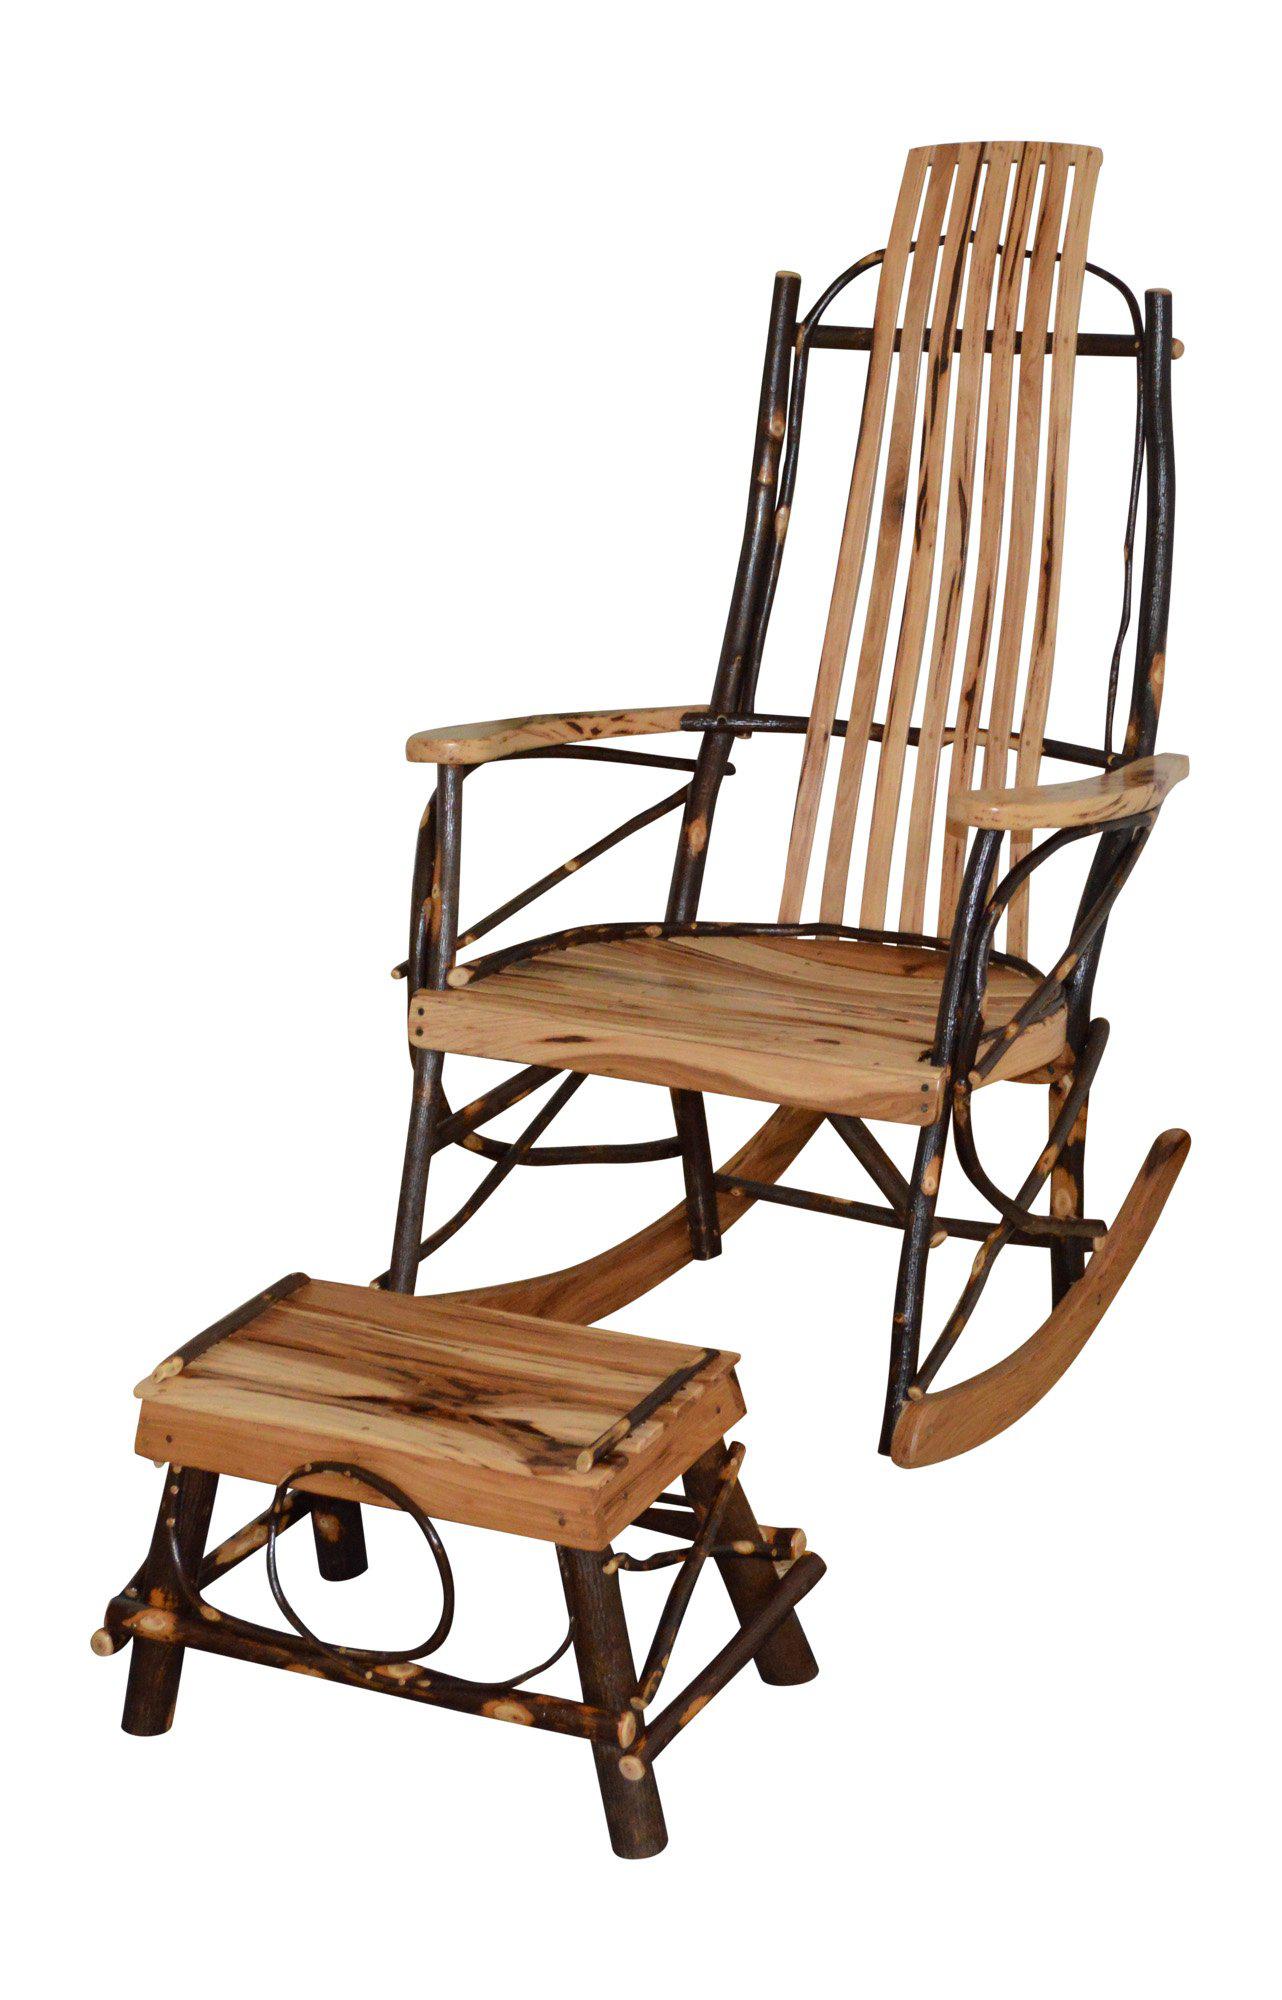 A&L Furniture Co. Amish Bentwood. 7-Slat Hickory Rocking Chair With Foot Stool Set - LEAD TIME TO SHIP 4 WEEKS OR LESS